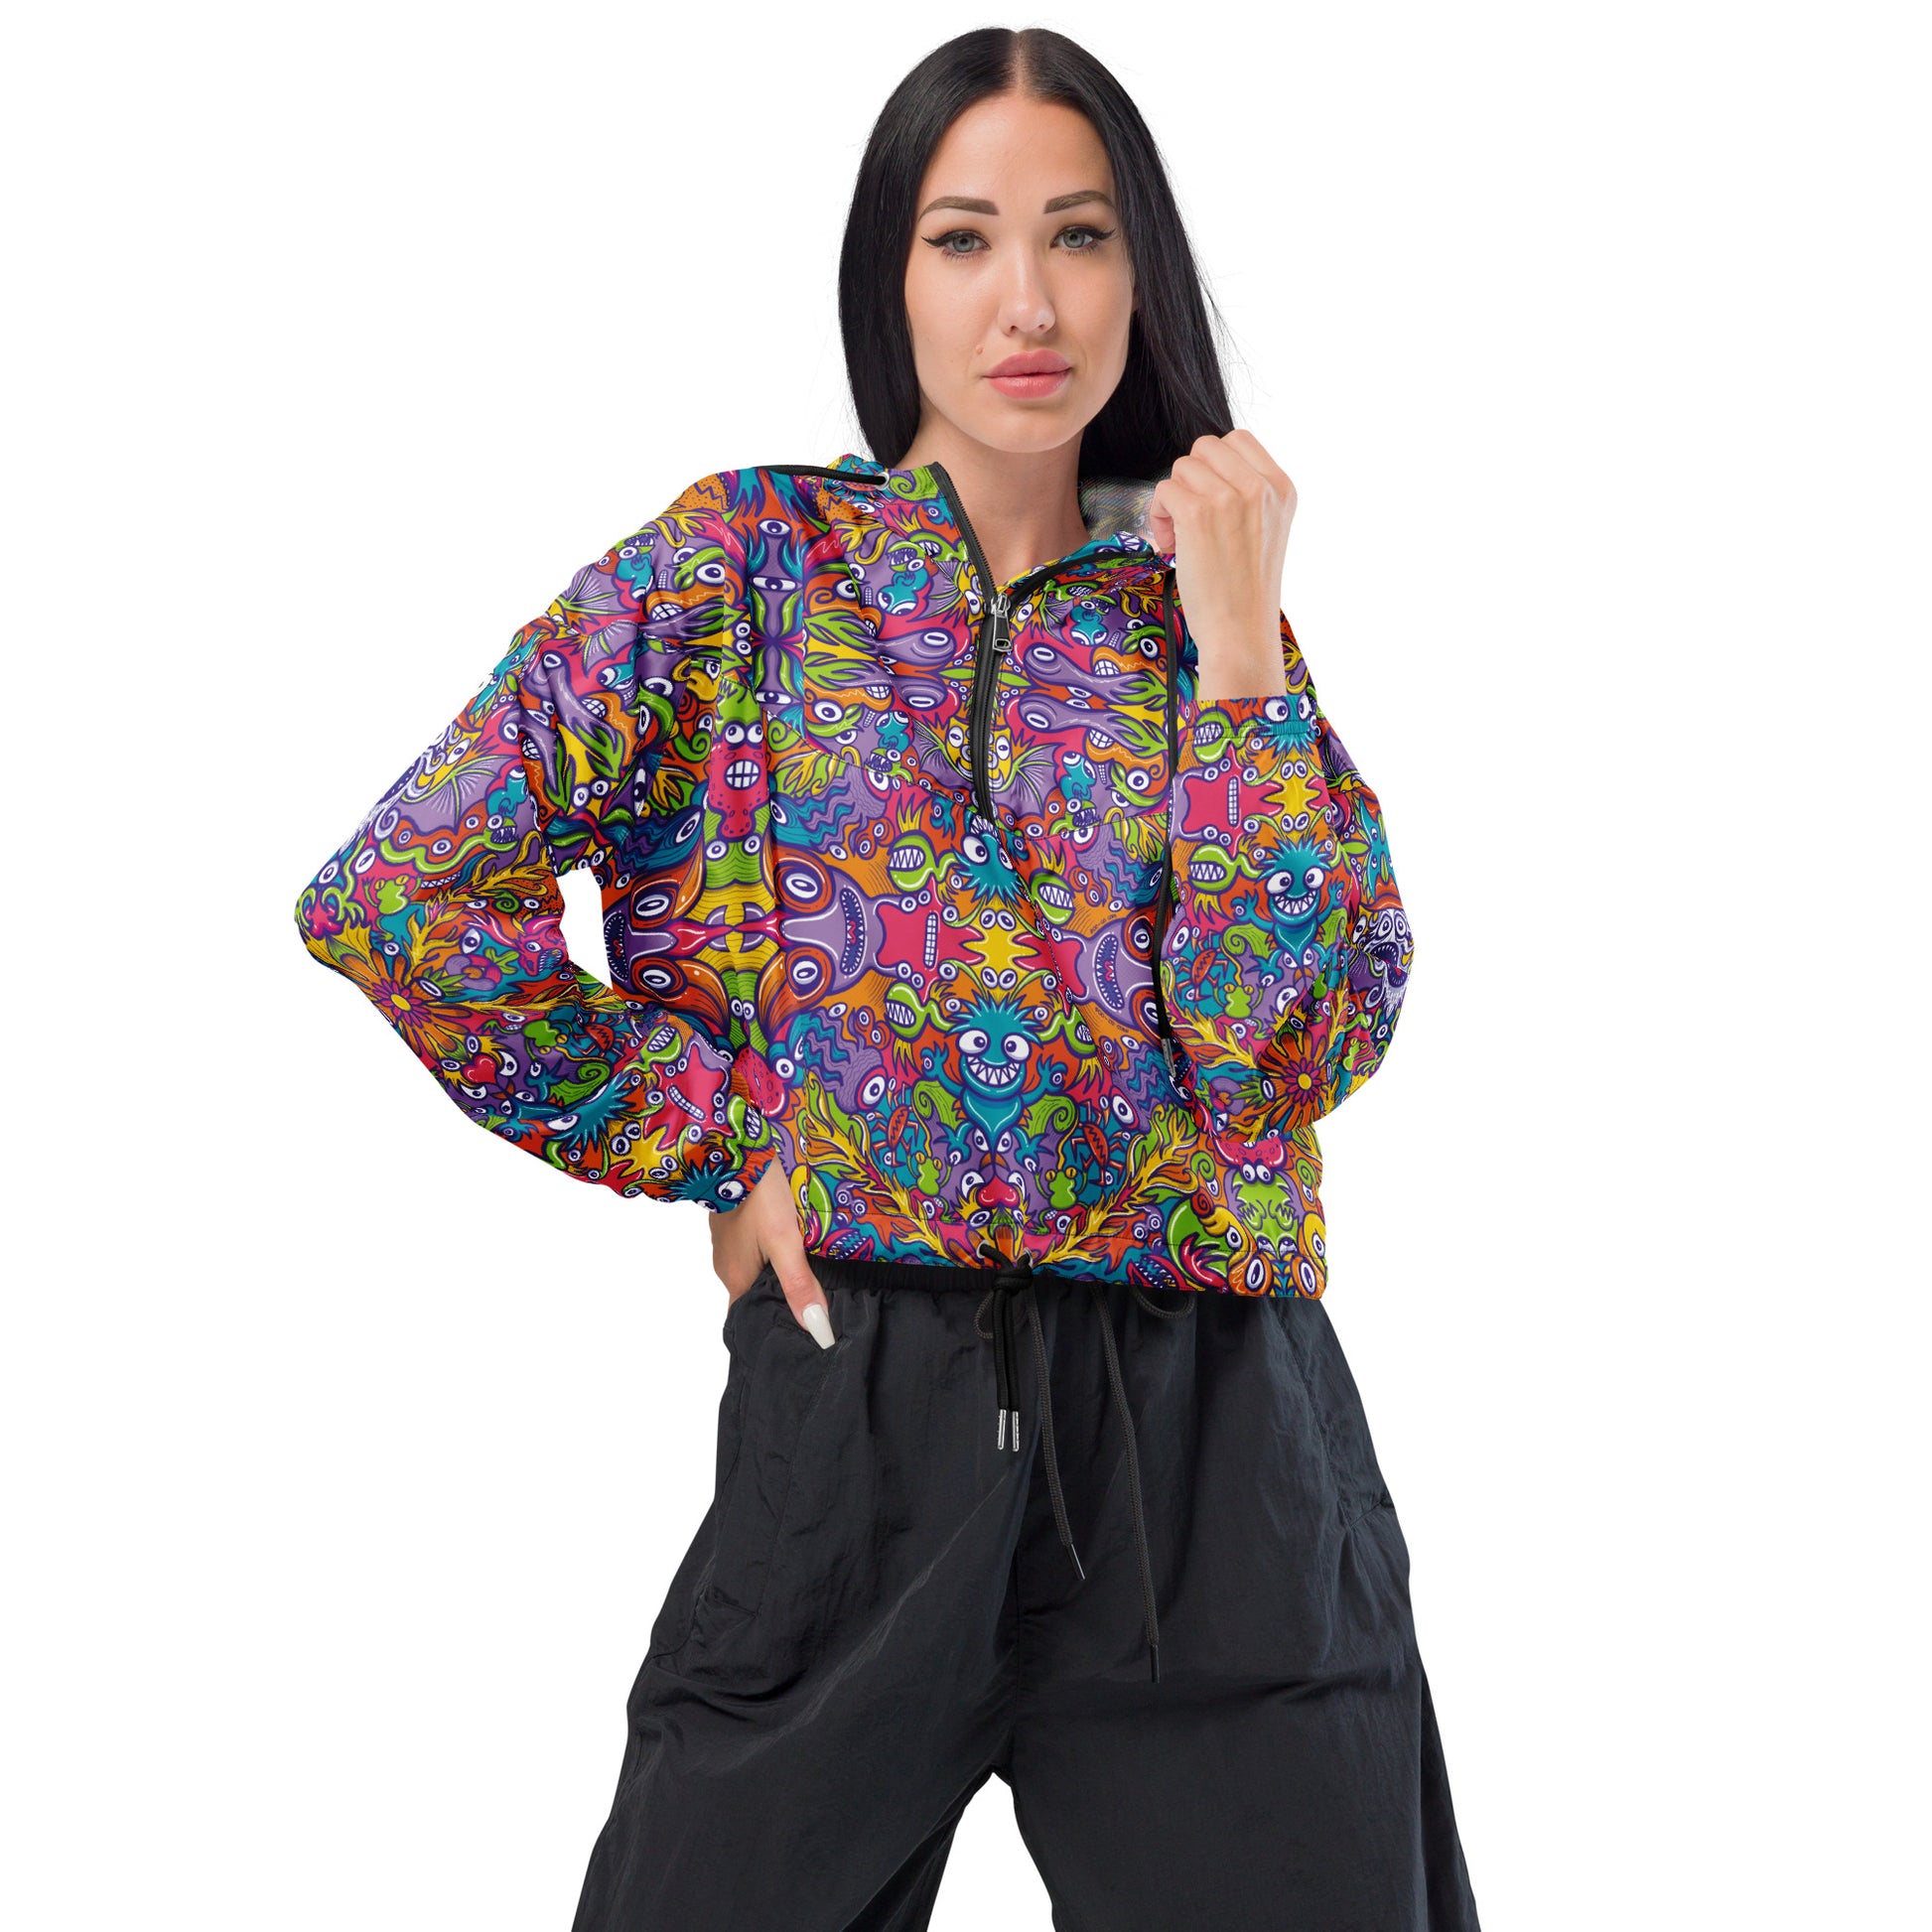 The Wizard's Dream: Shaping a New Generation of Doodle Creatures - Women’s cropped windbreaker. Front view